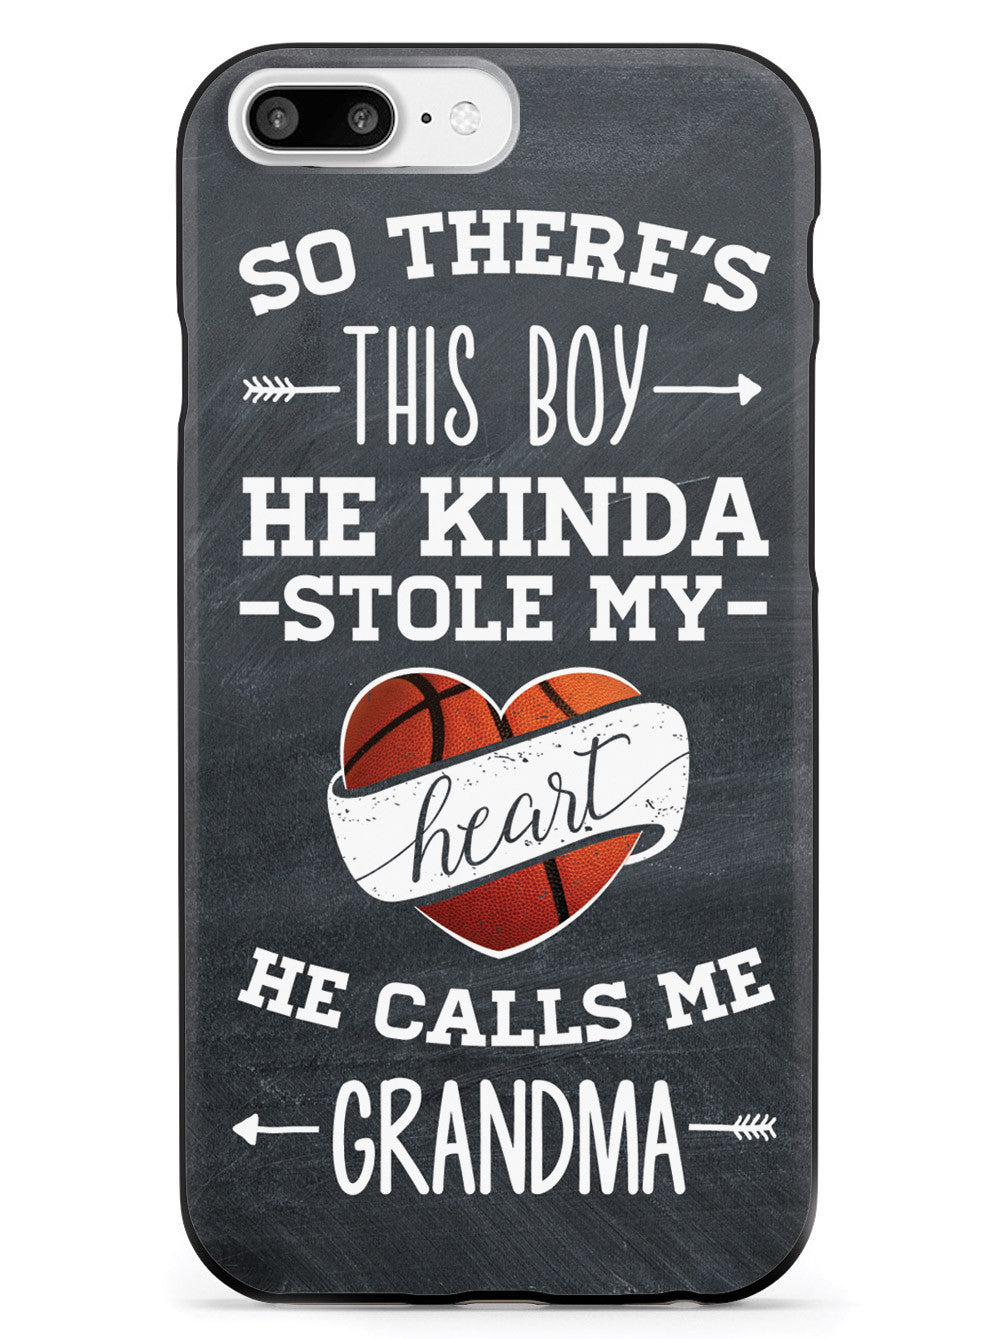 So there's this Boy - Basketball Player - Grandma Case